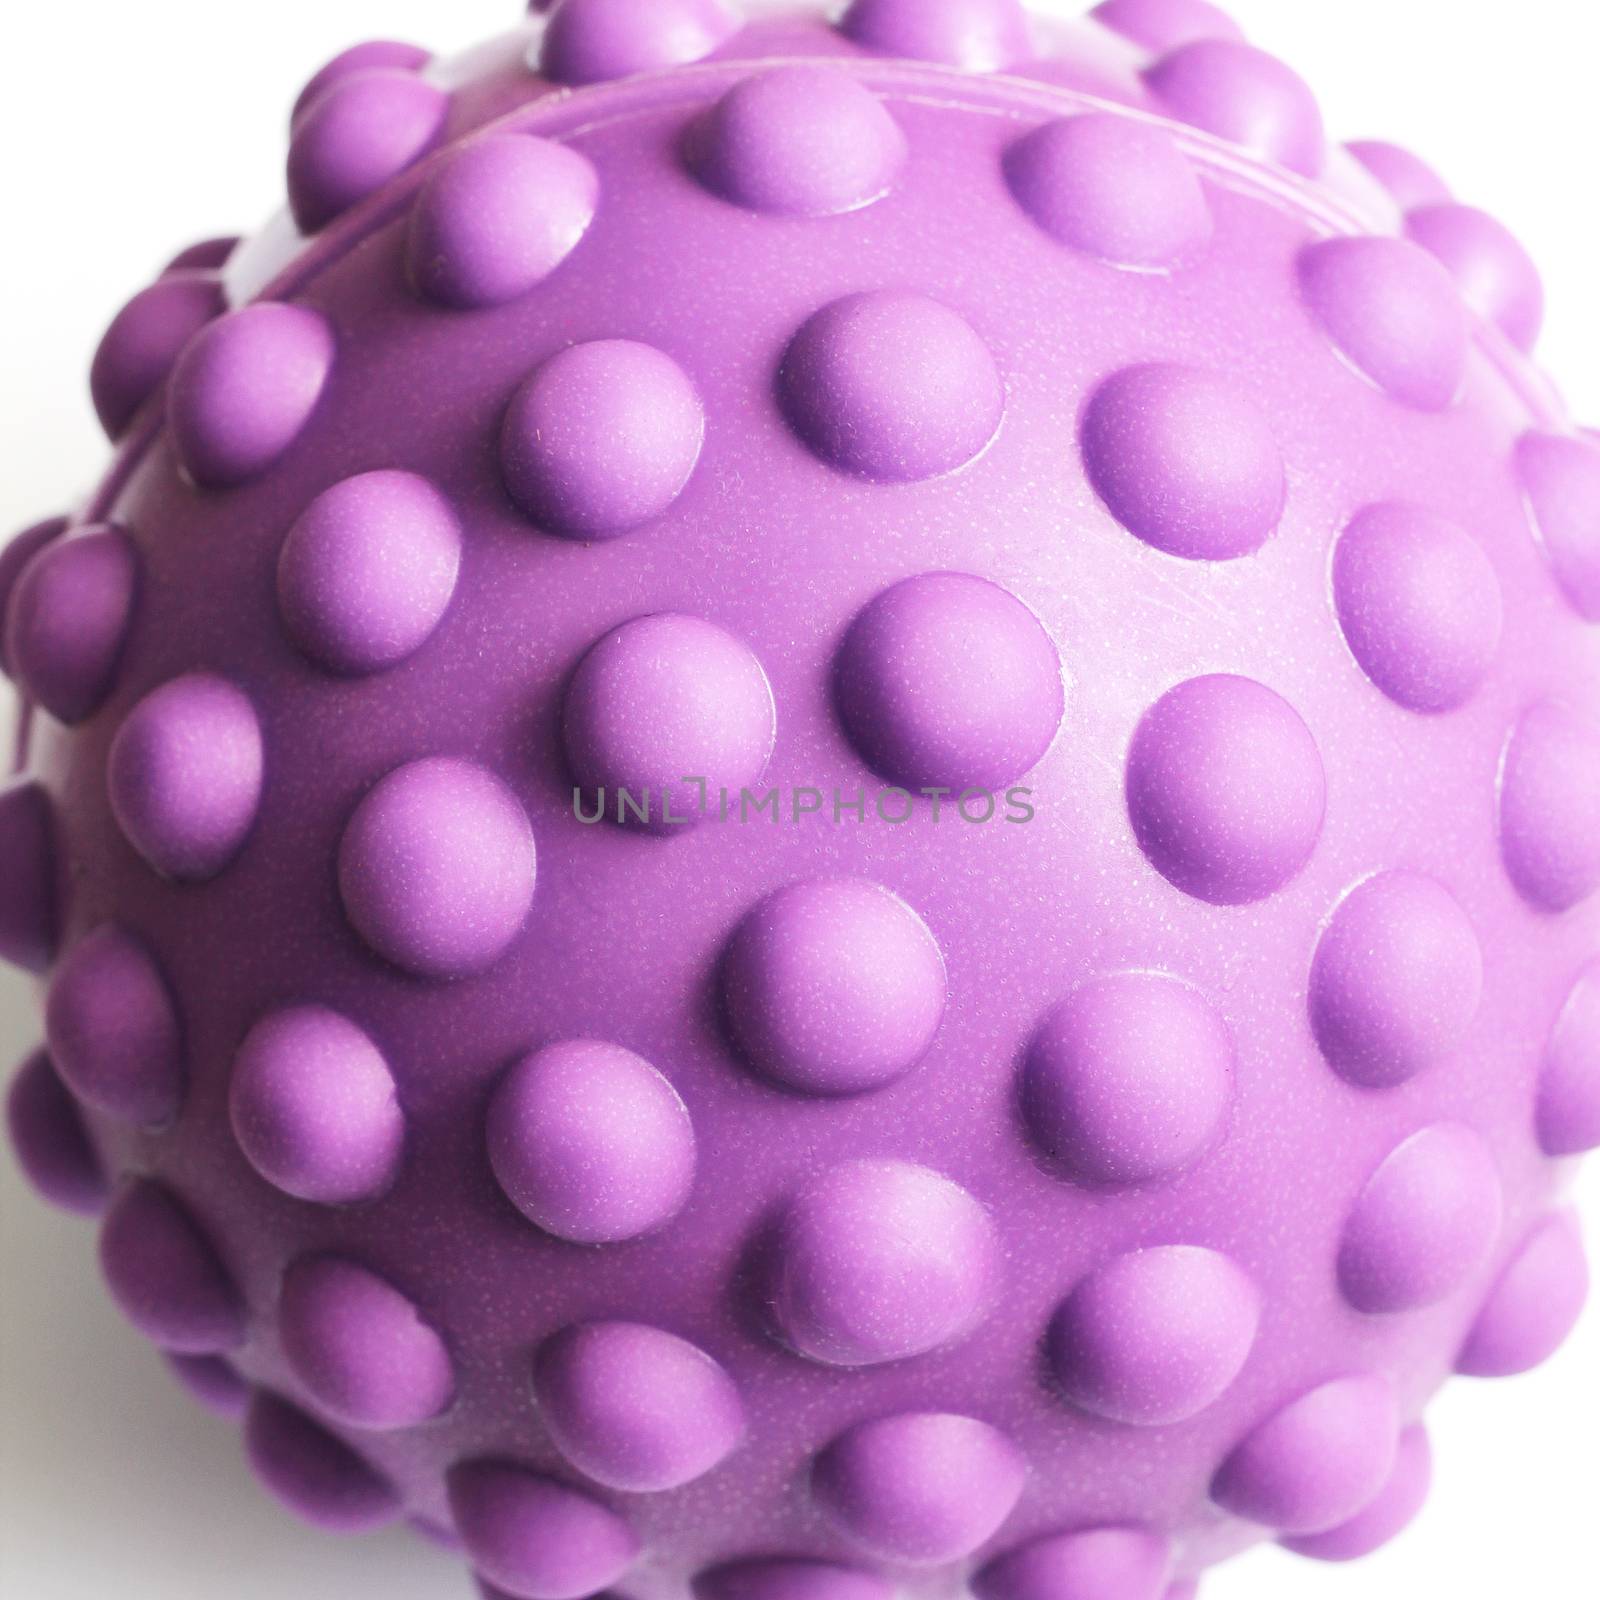 Rubber sensory ball of bright color isolated on white